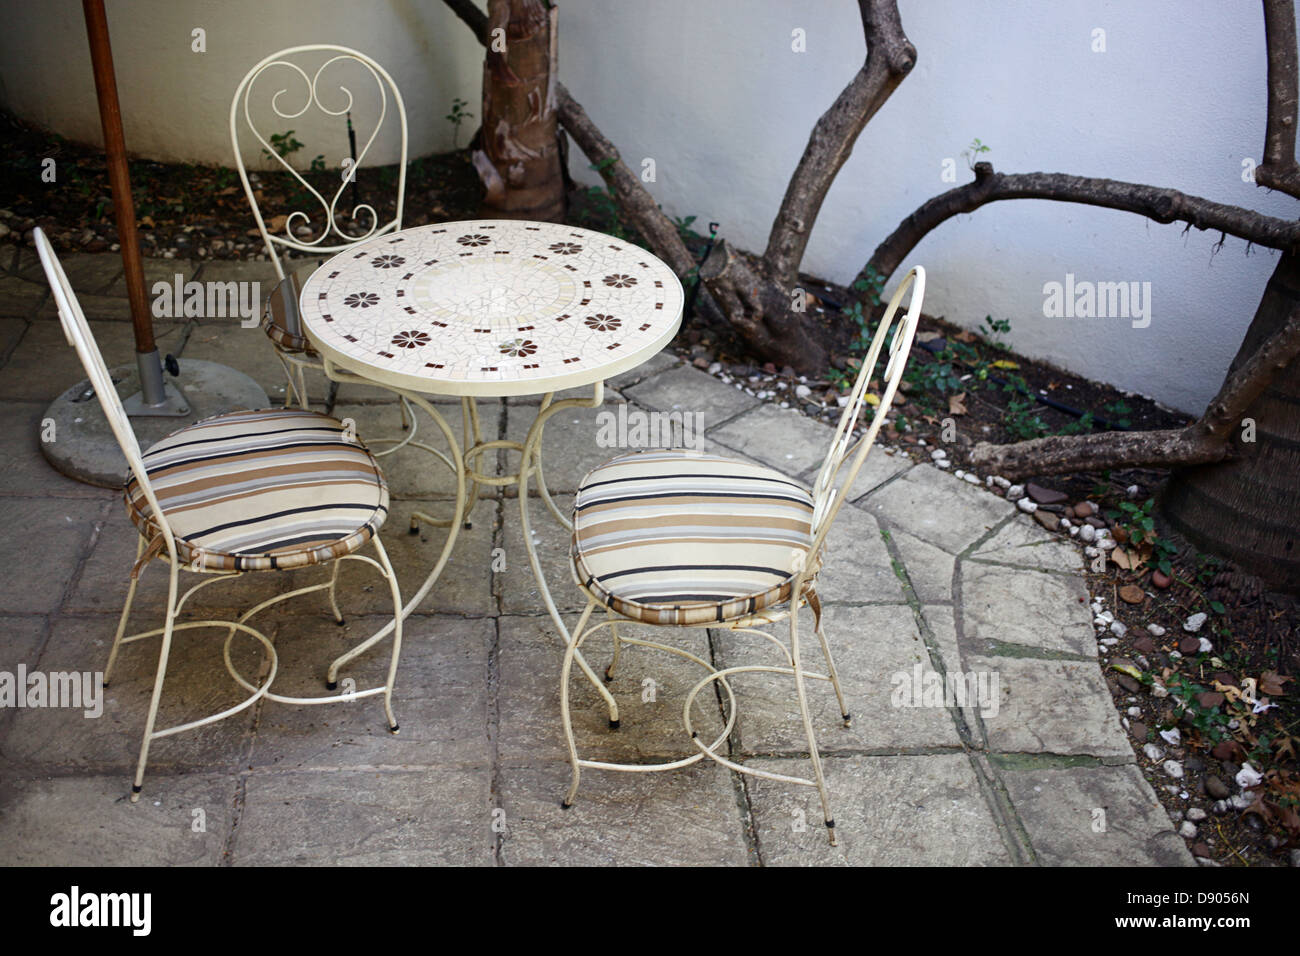 provencal style wrought iron chairs and table Stock Photo